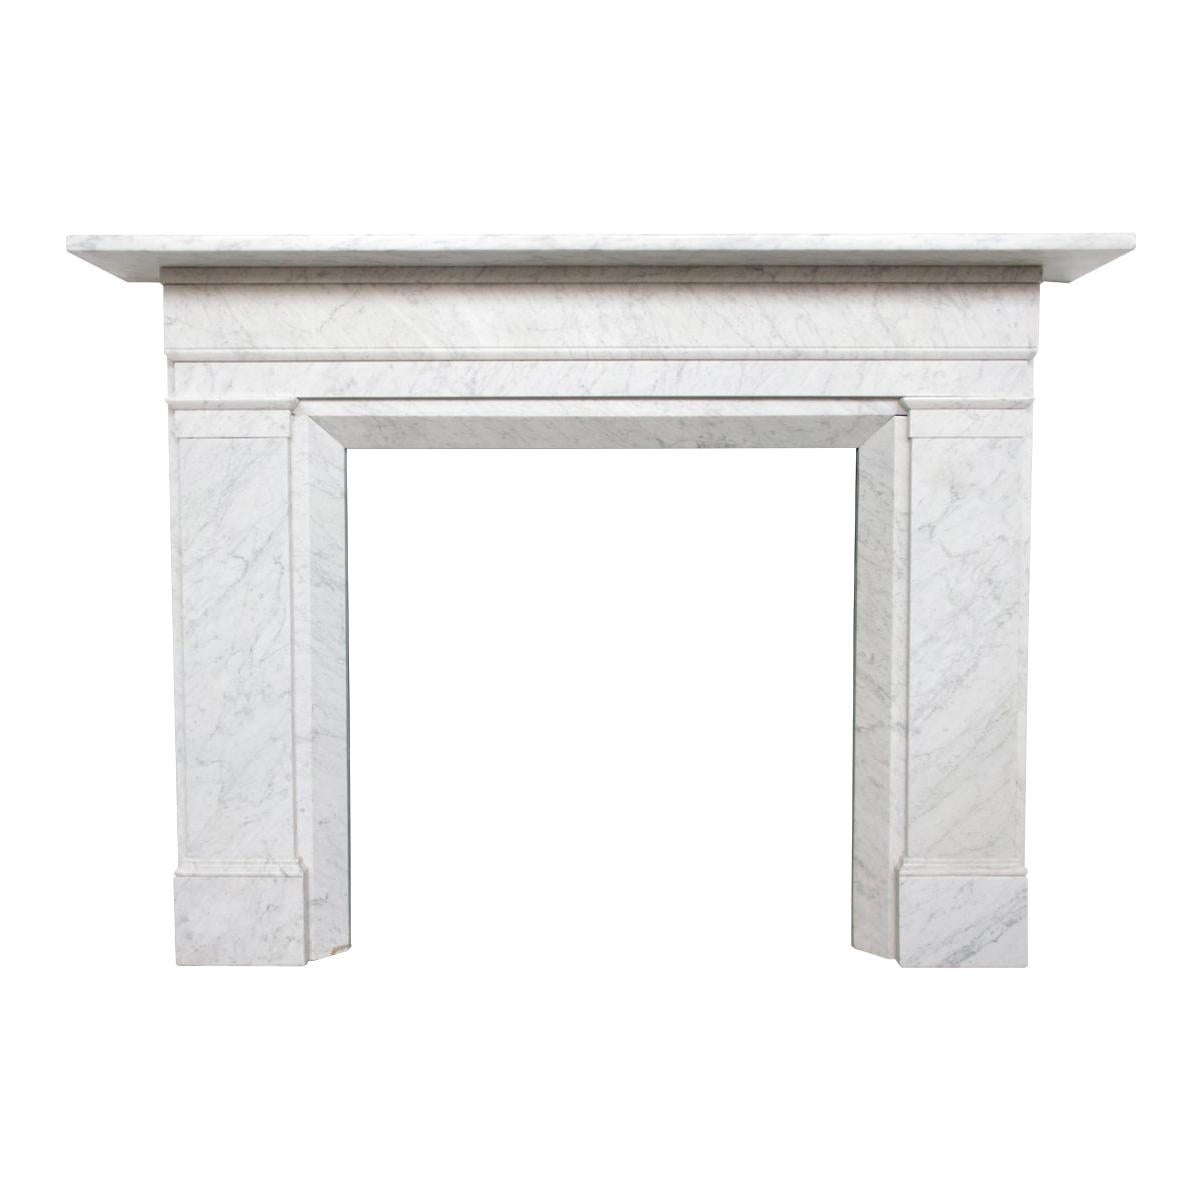 Large Restored Early Victorian Carrara Marble Fireplace Surround